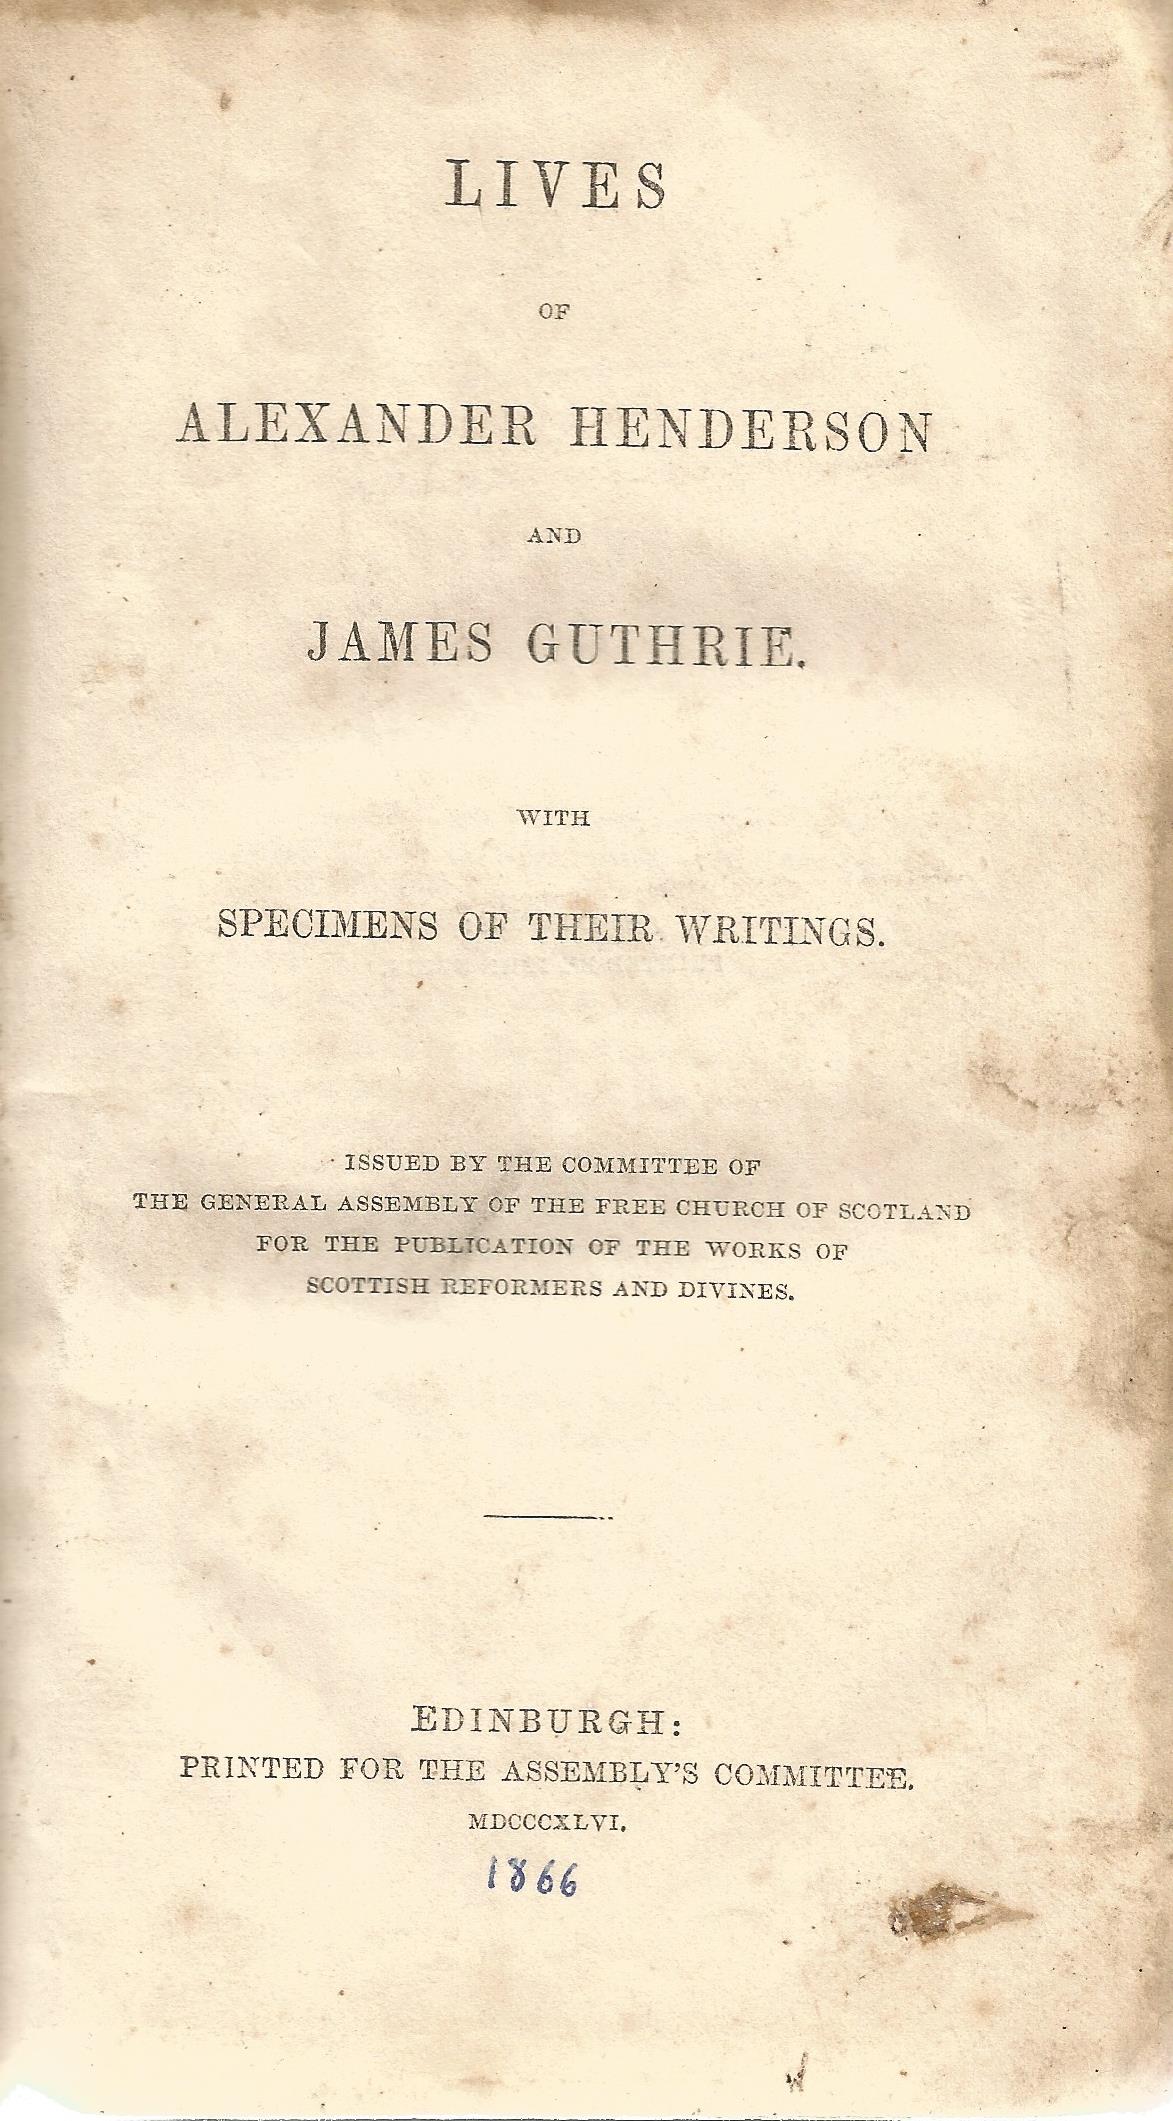 Lives of Alexander Henderson and James Guthrie with Specimens of Their Writings 1866 Hardback Book - Image 2 of 2